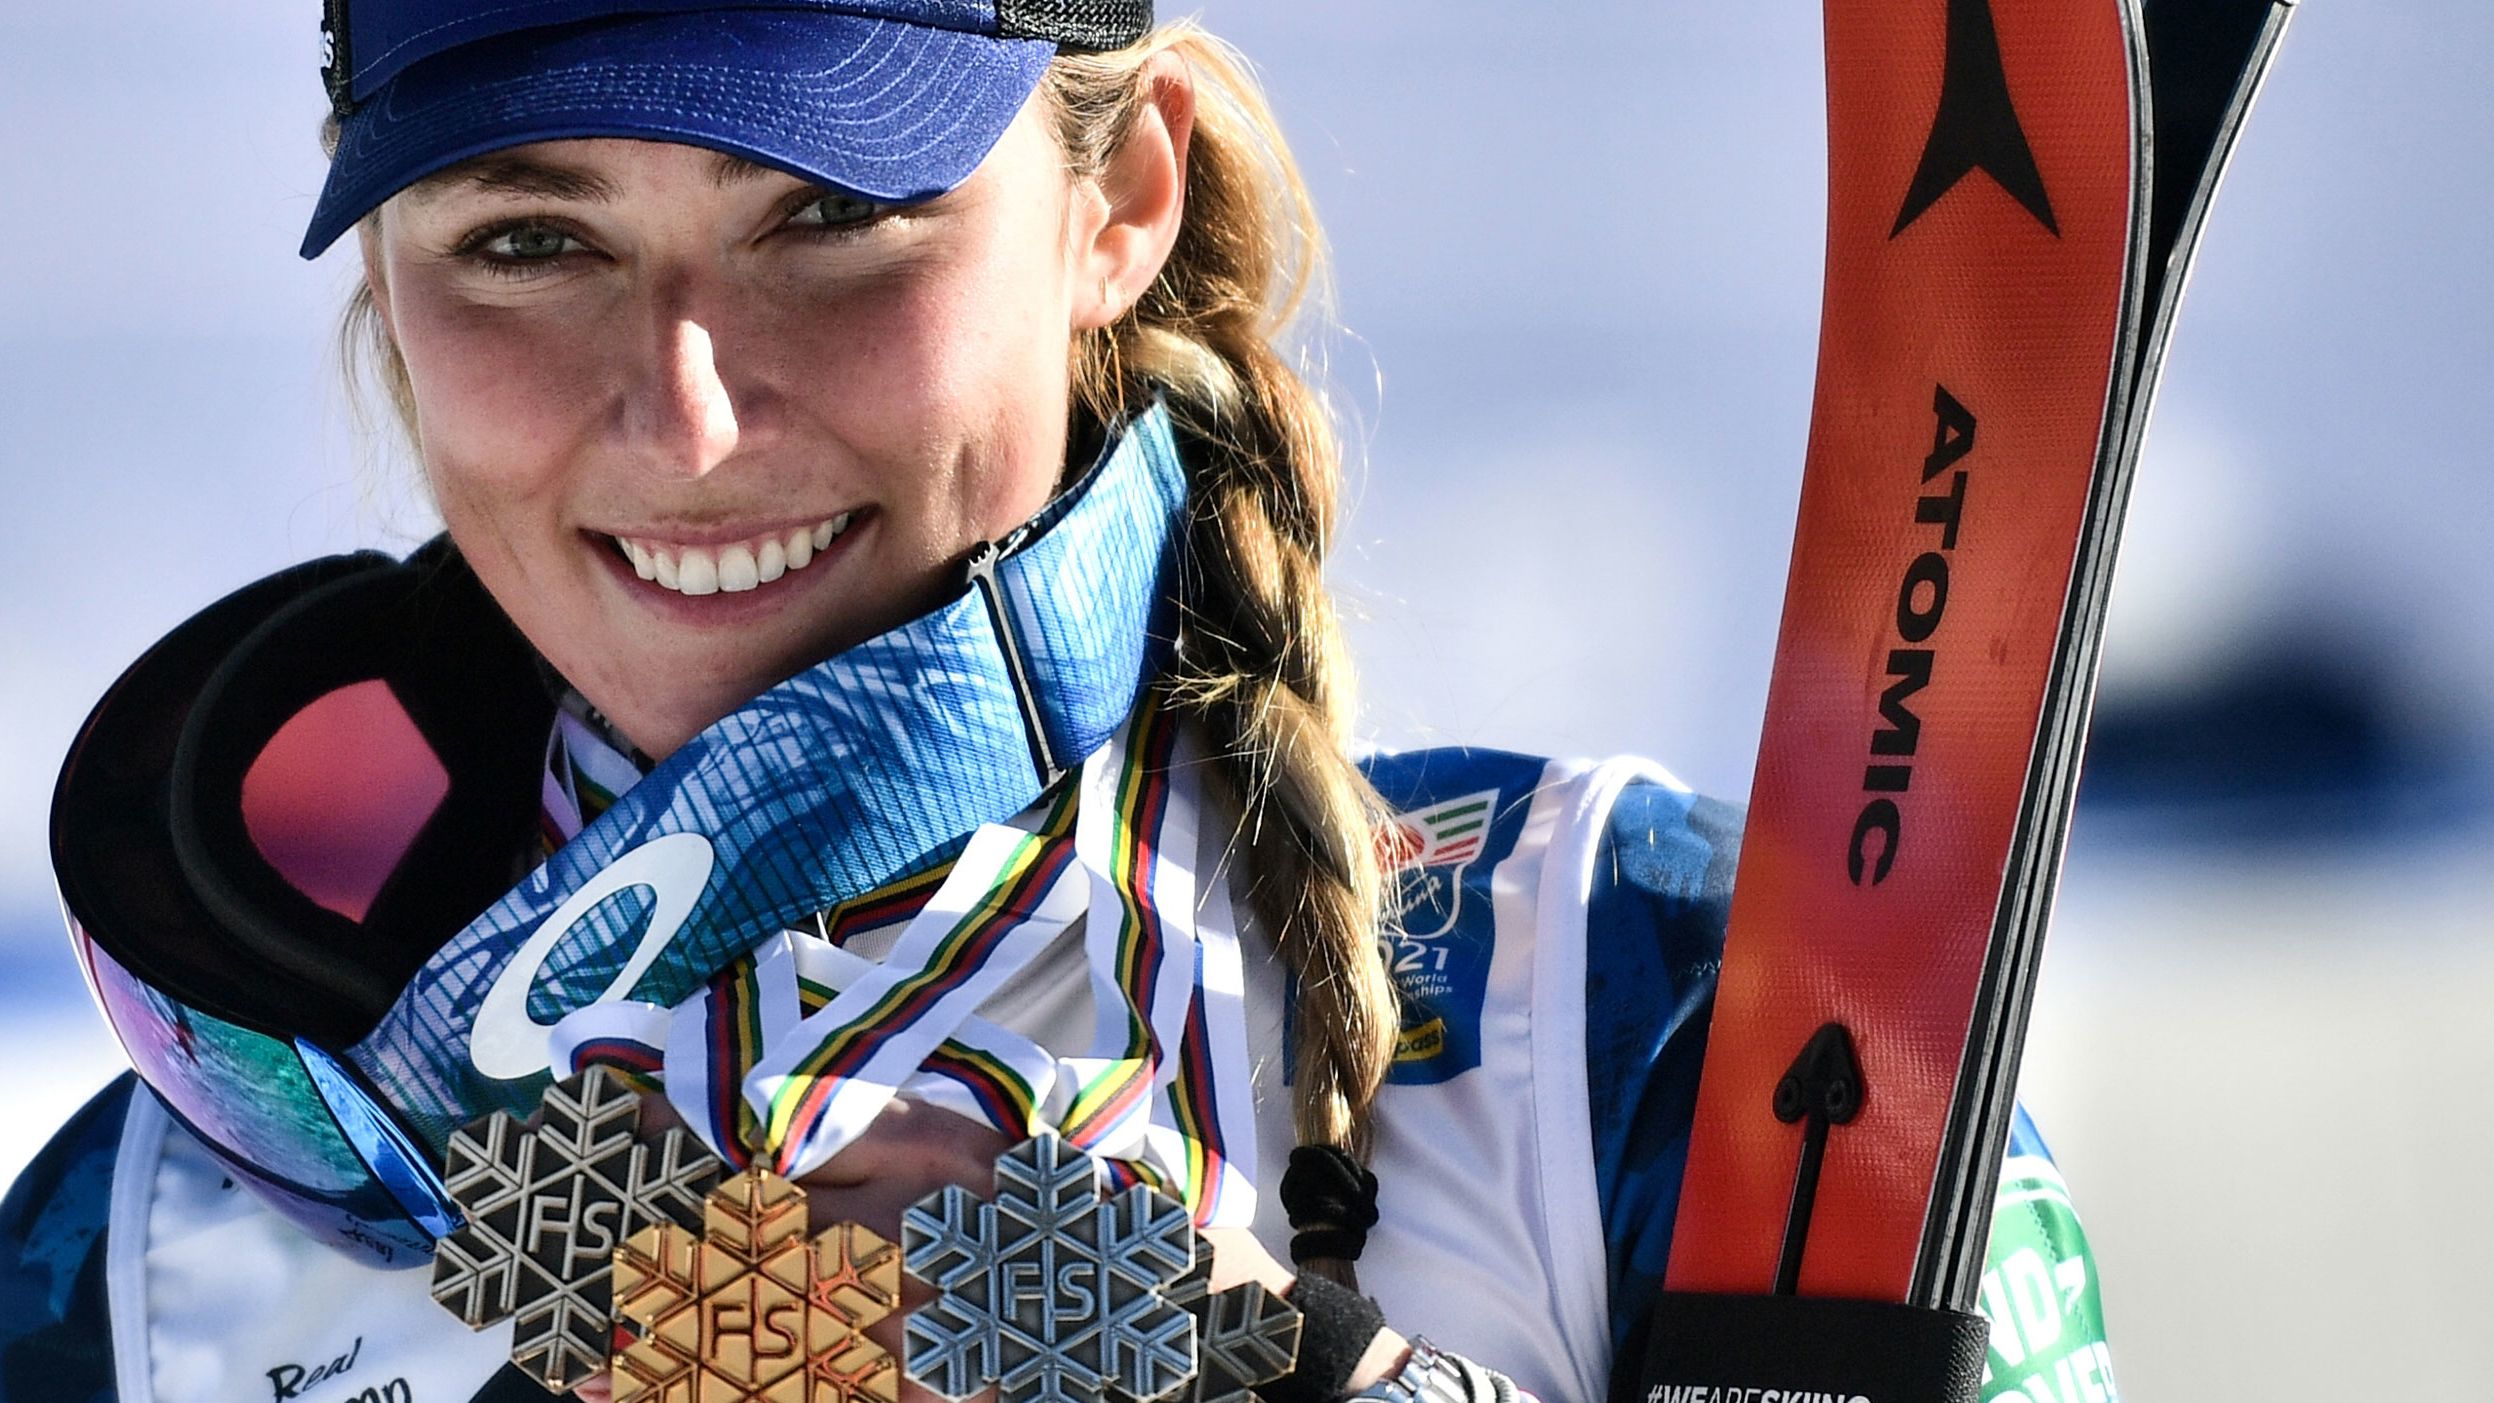 <strong>Mikaela Shiffrin (United States):</strong> Shiffrin has been the face of American skiing for years now, and she's still at the height of her powers. The 26-year-old, who's won Olympic gold twice, leads the World Cup overall standings and <a href="https://www.cnn.com/2022/01/12/sport/mikaela-shiffrin-wins-record-breaking-world-cup-slalom-spt-intl/index.html" target="_blank">recently won her 47th World Cup slalom race</a> — that's the most World Cup victories ever in a single discipline. Shiffrin is also the defending world champion in the combined event, which is the slalom plus the downhill. She will be a medal threat in several events.